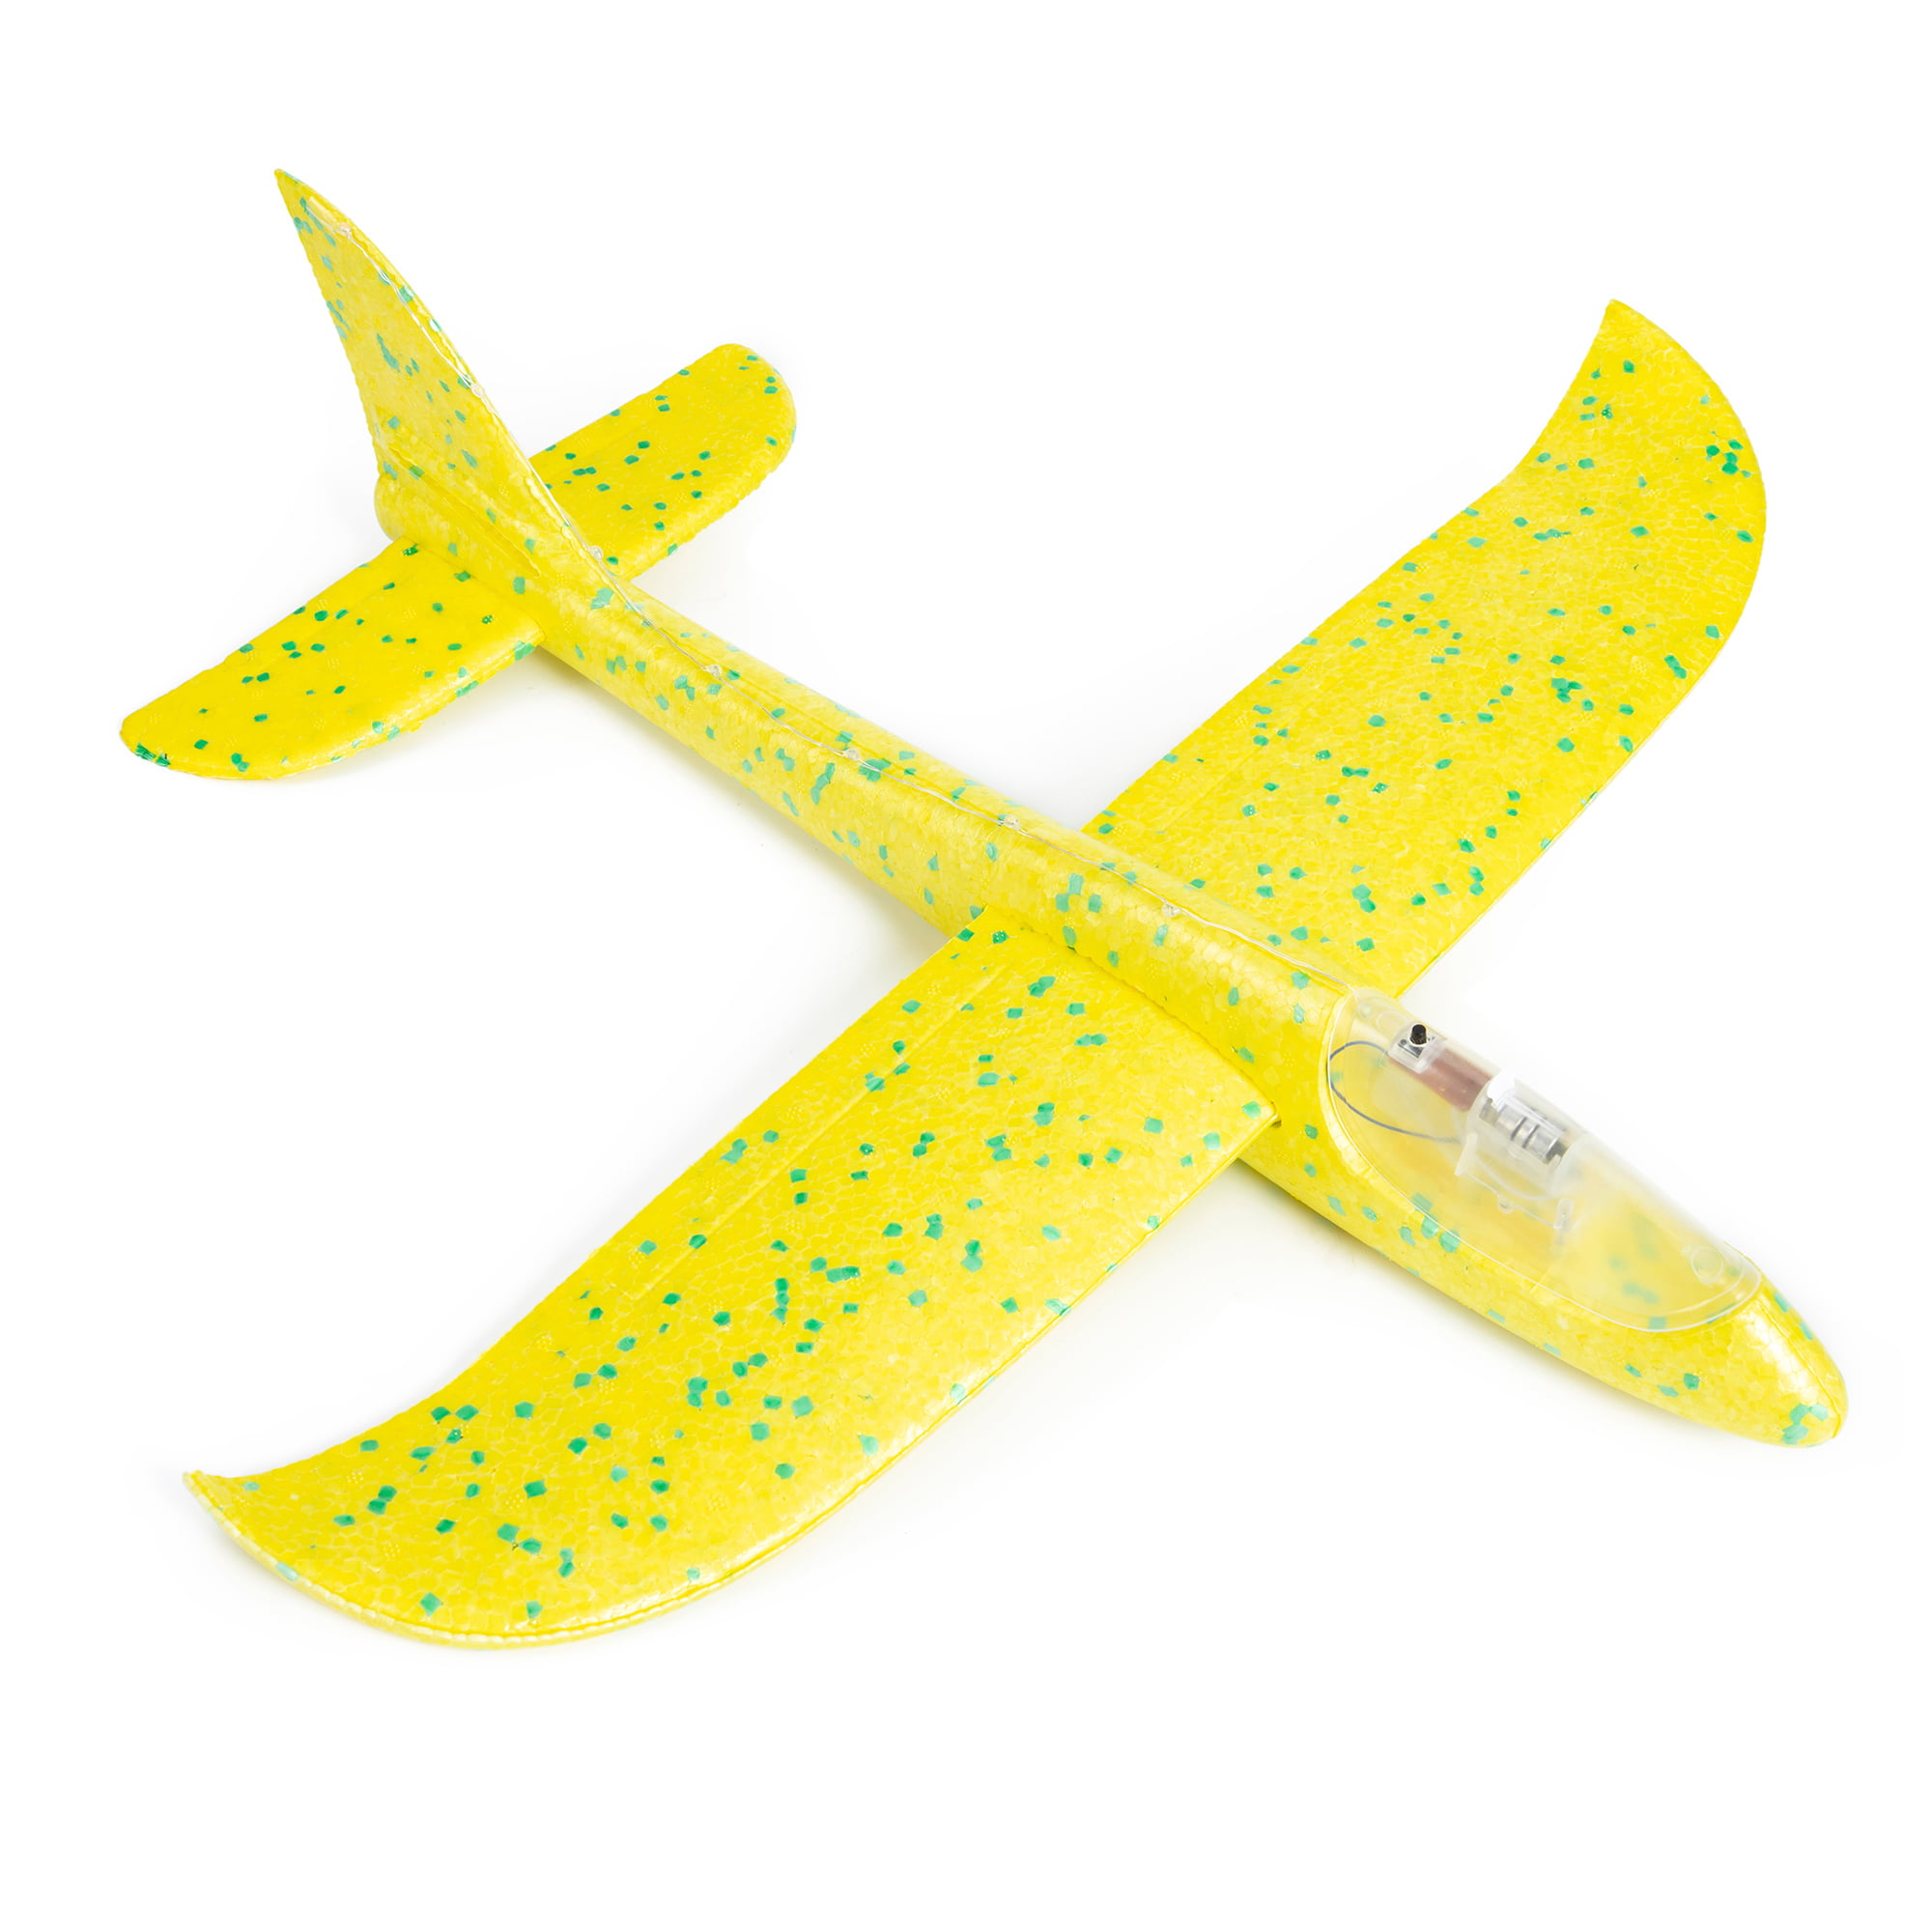 Foam Throwing Glider Airplane LED  Flying Toy  SHIPPED FREE FROM PITTSBURGH 